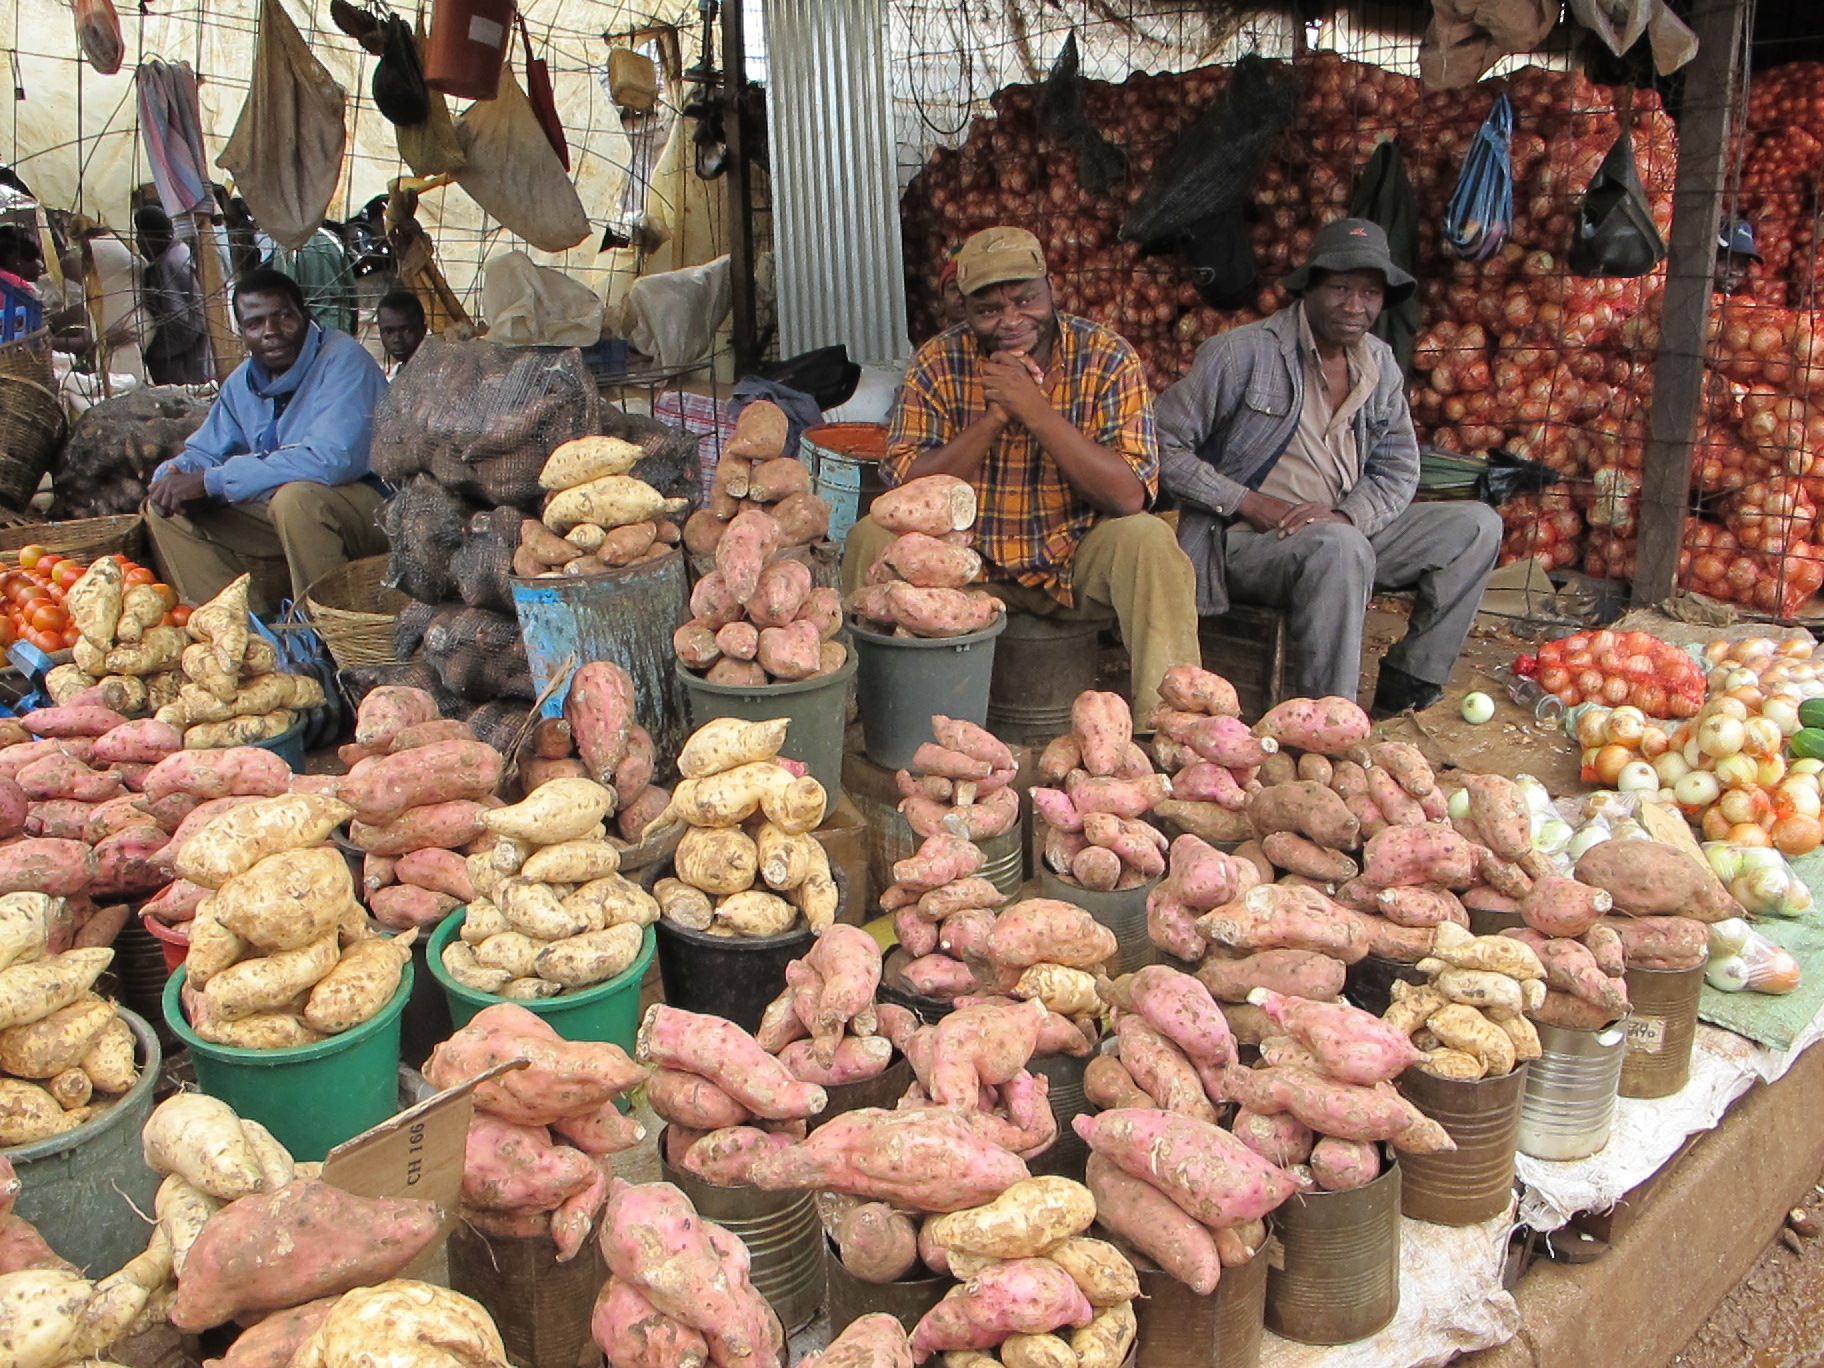 Market Day in Zimbabwe, yes I purchased such a potato - apparently they are eco.